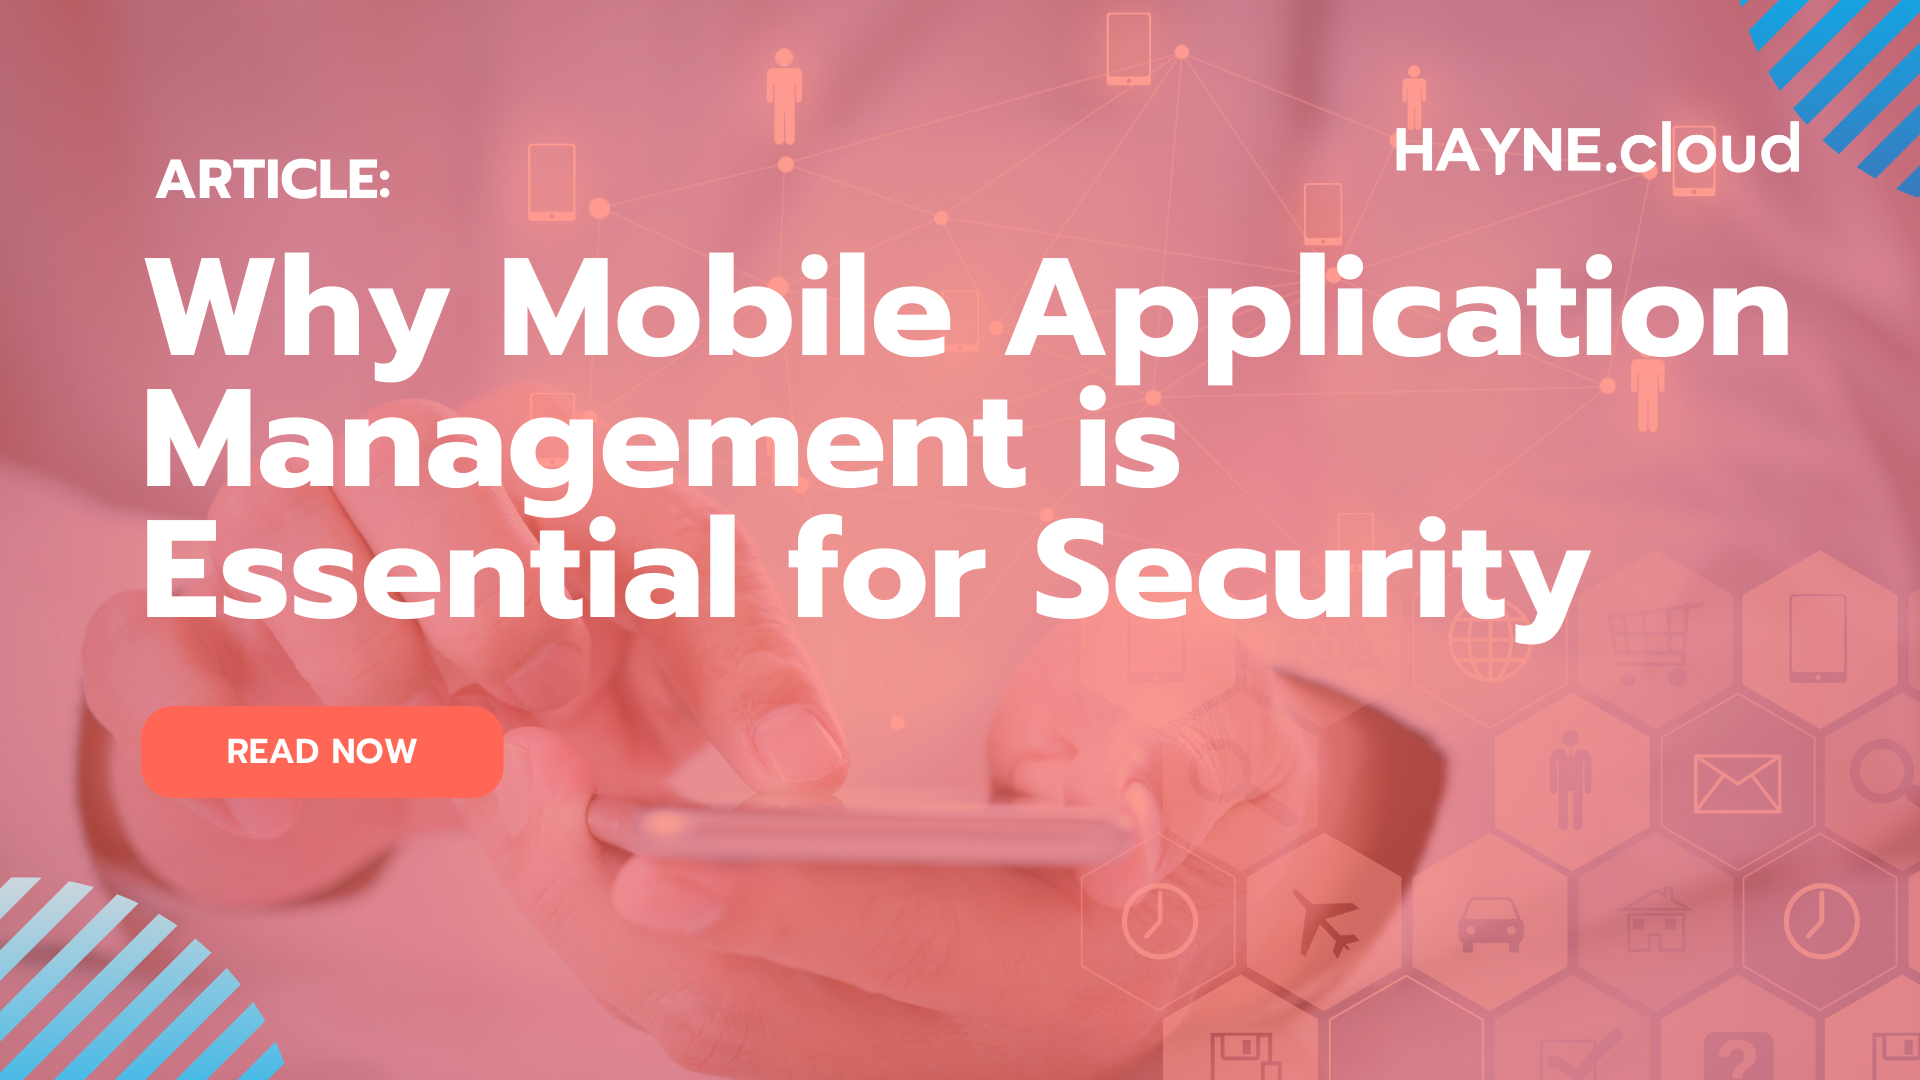 Why Mobile Application Management is Essential for Security